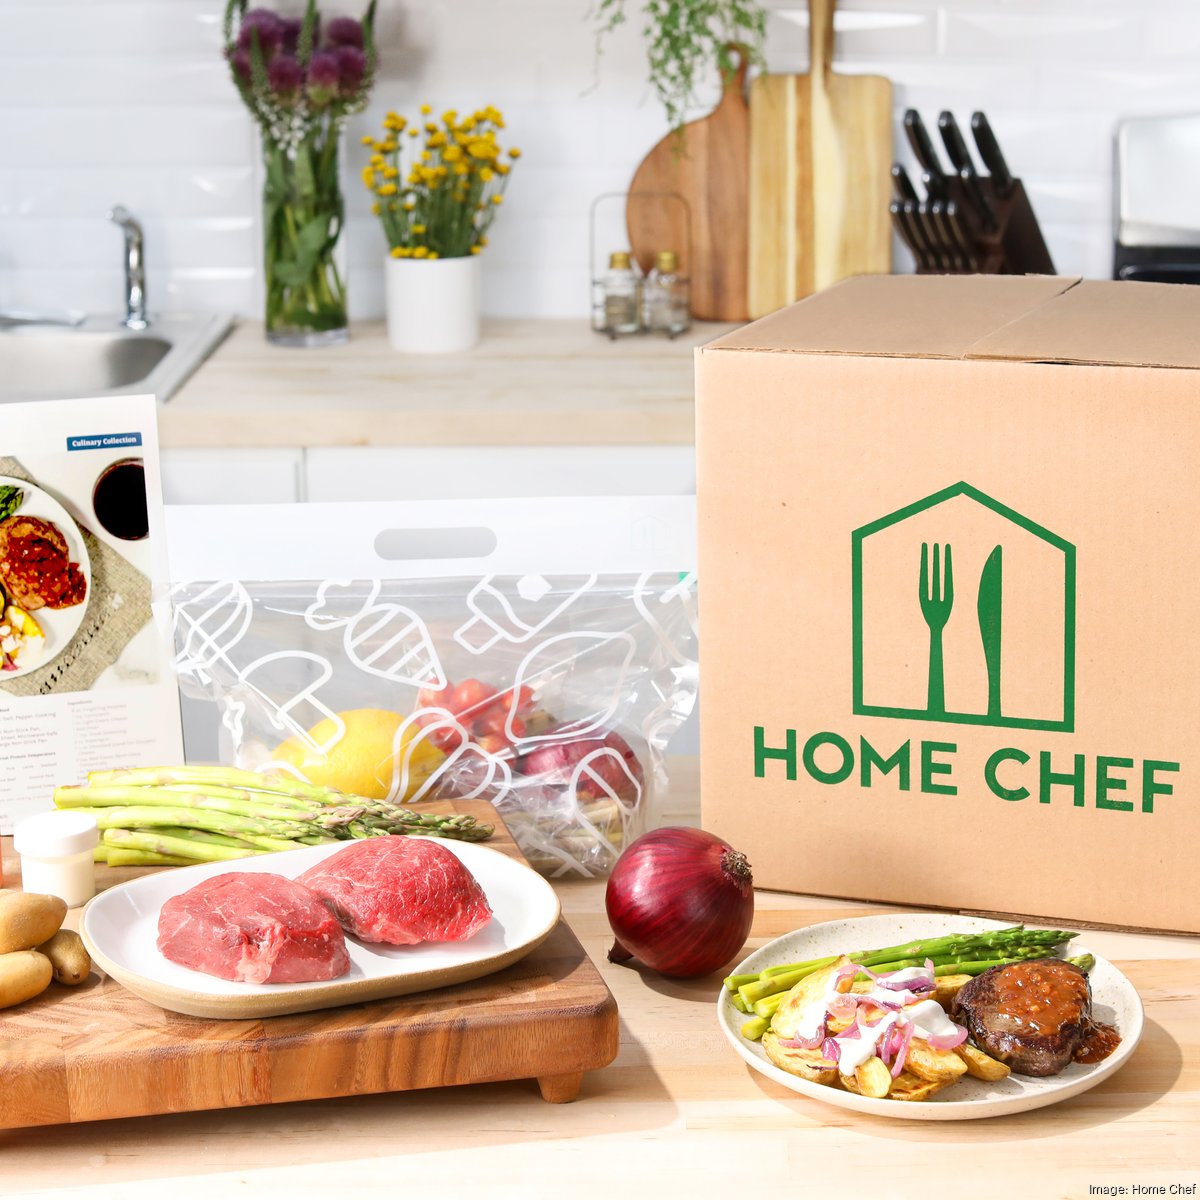 Enter for your chance to win* an $800 Home Chef meal package - CNET